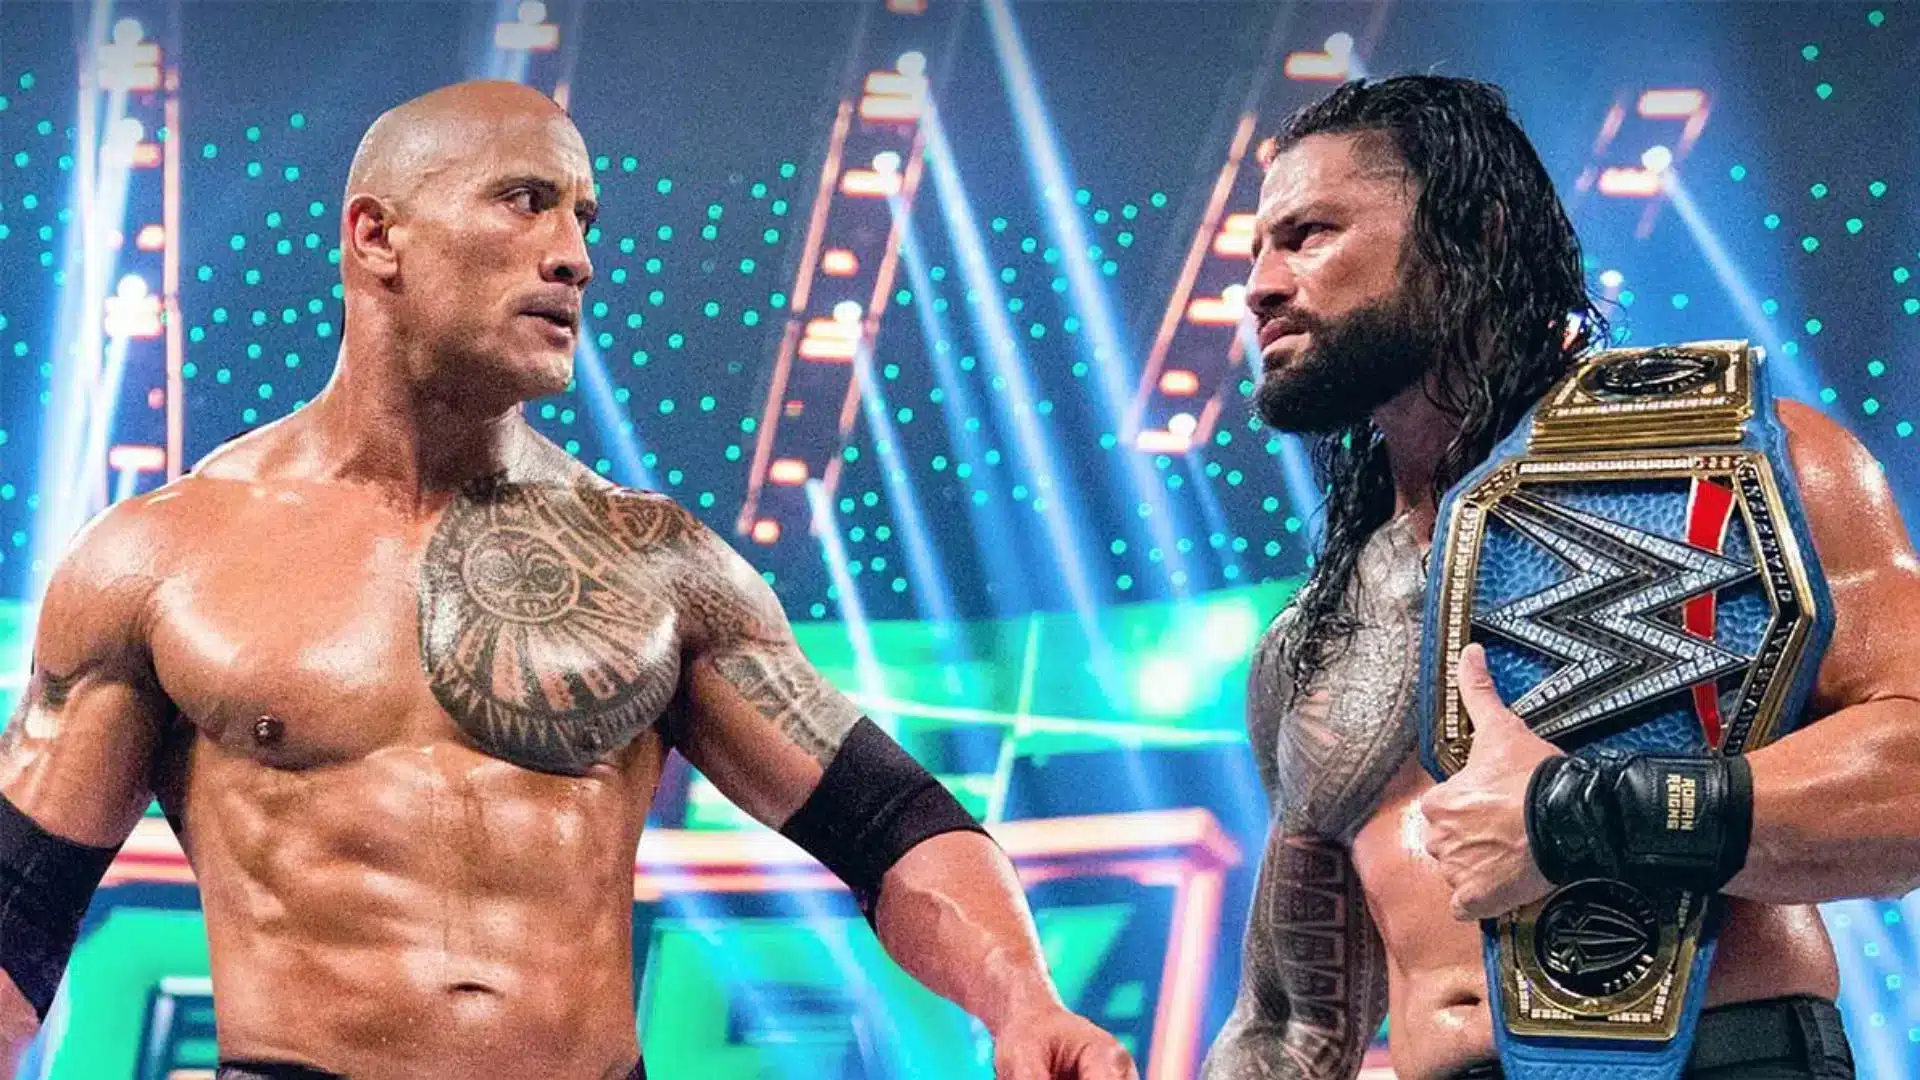 The Rock and Roman Reigns in the ring together